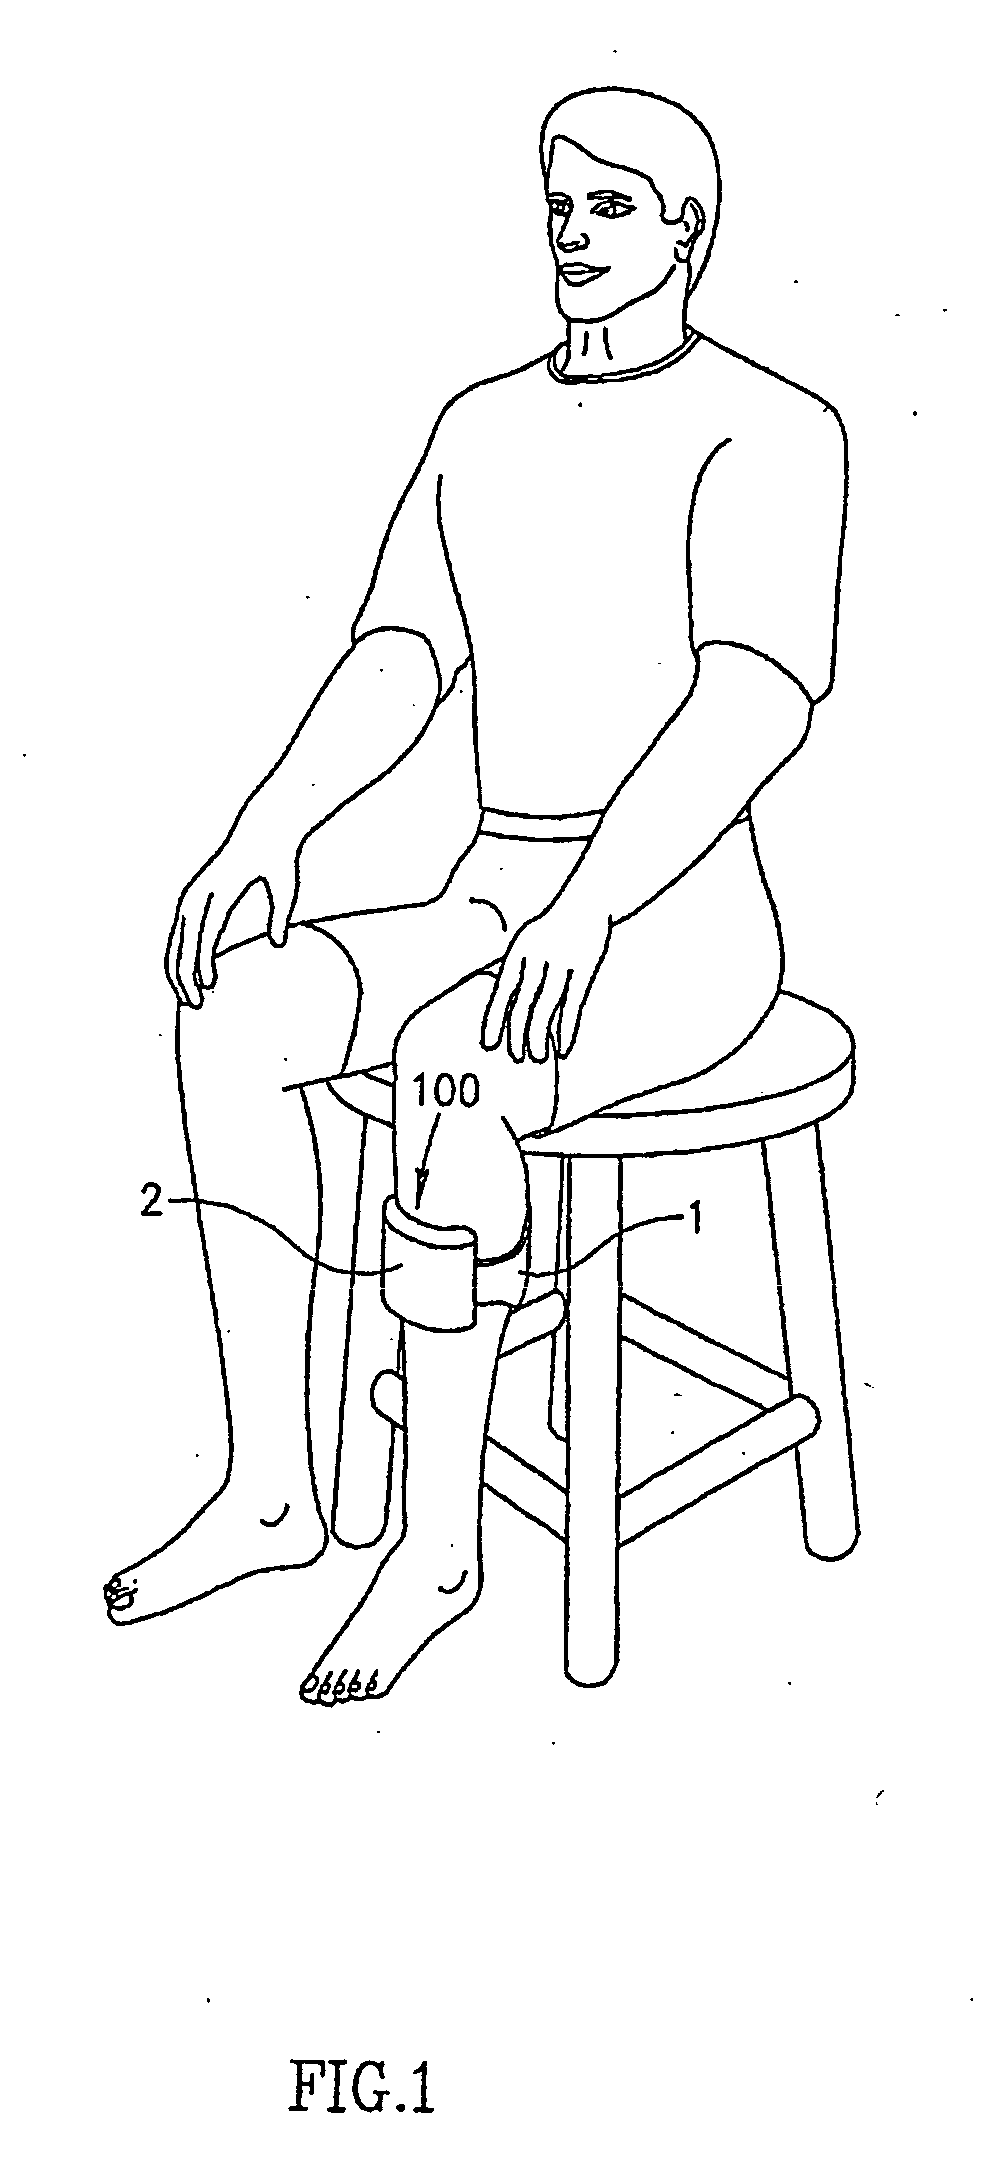 Portable device for the enhancement of circulation of blood and lymph flow in a limb